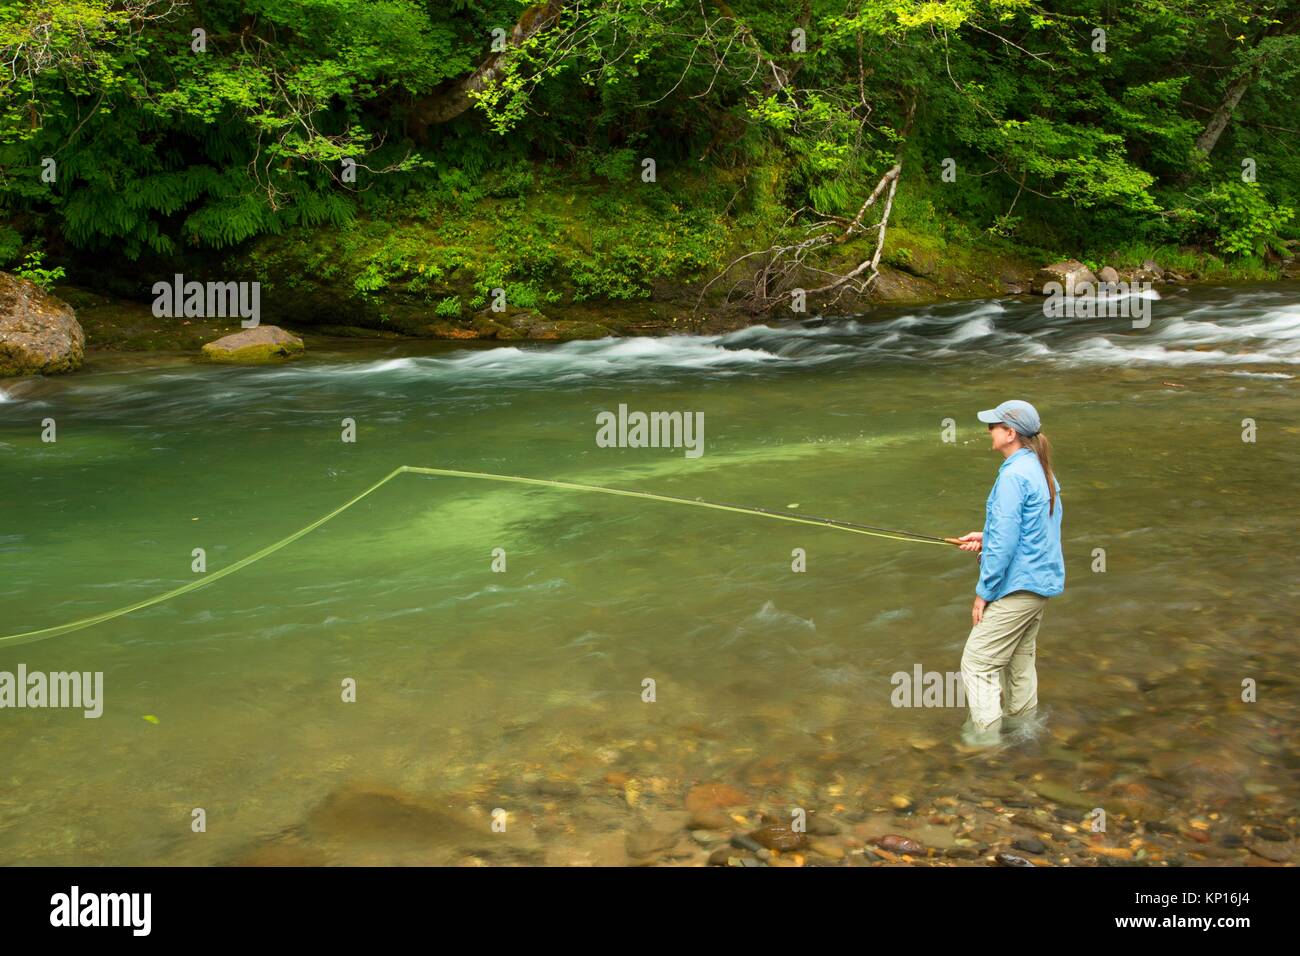 Fly fishing the Lewis River, Gifford Pinchot National Forest, Washington. Stock Photo